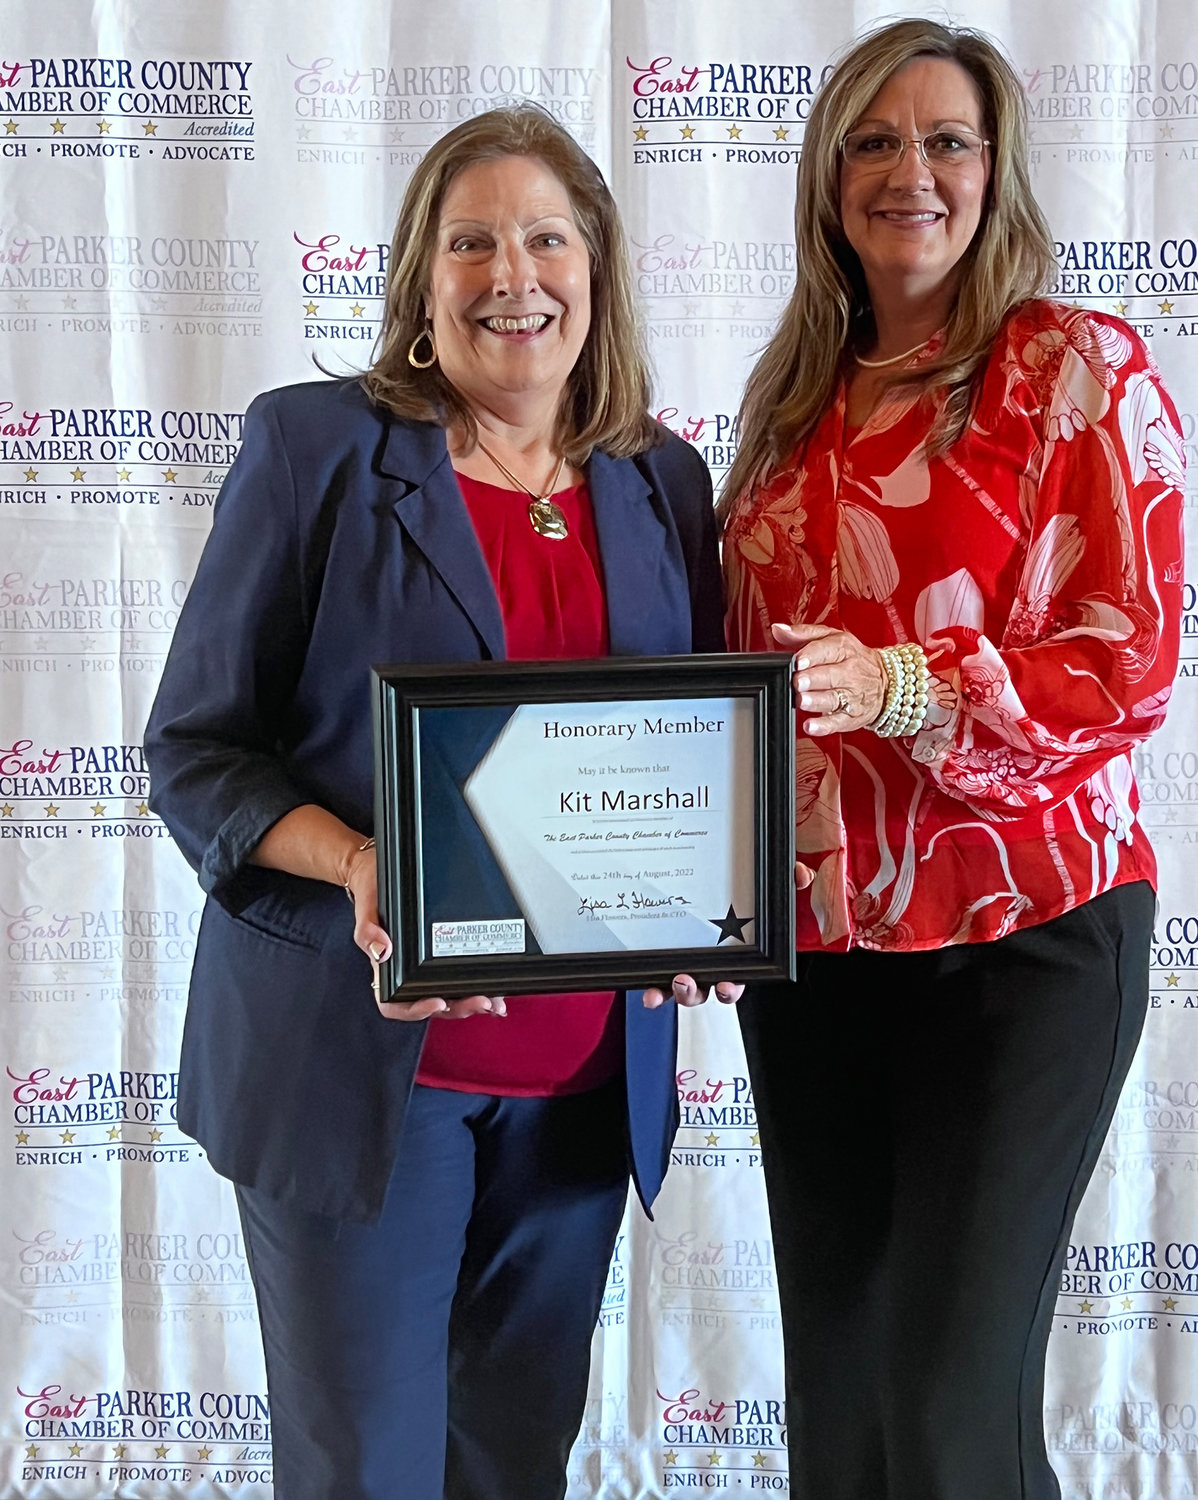 East Parker County Chamber of Commerce President Lisa Flowers (right) presents the chamber's first honorary membership to Kit Marshall.